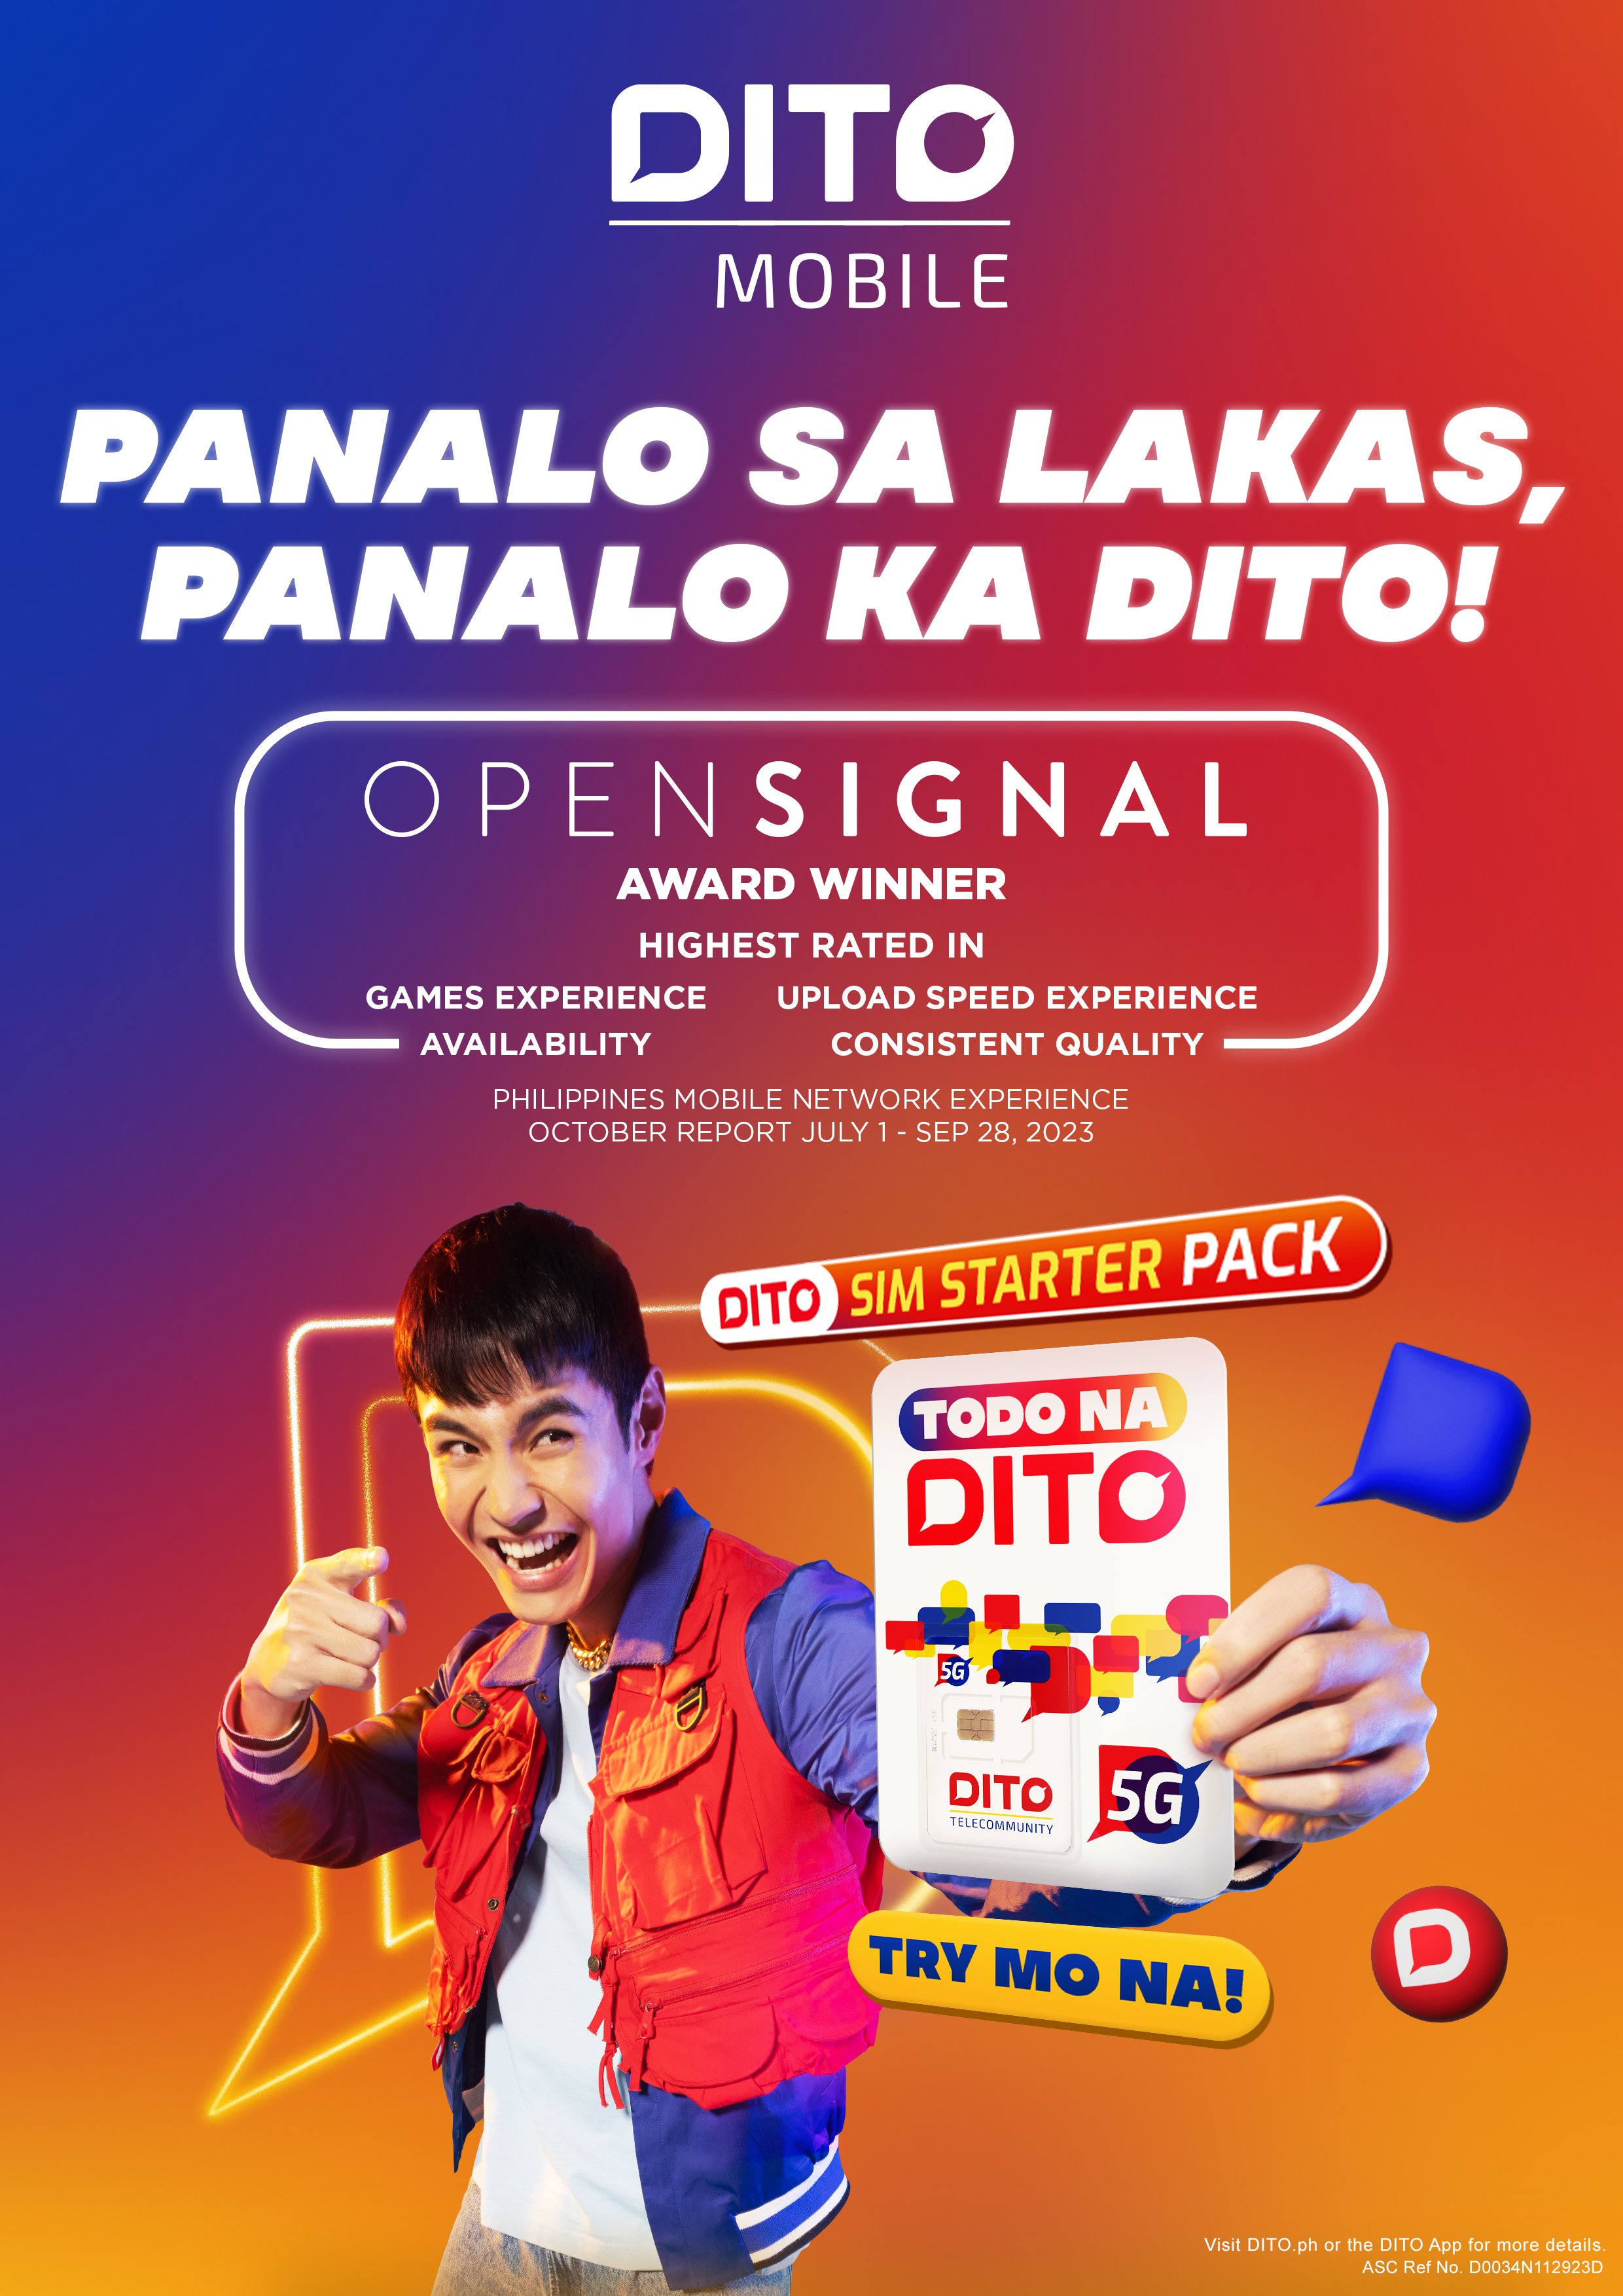 OPENSIGNAL 2023 GAMES EXPERIENCE WINNER DITO POWERS YOUR ONLINE GAMING